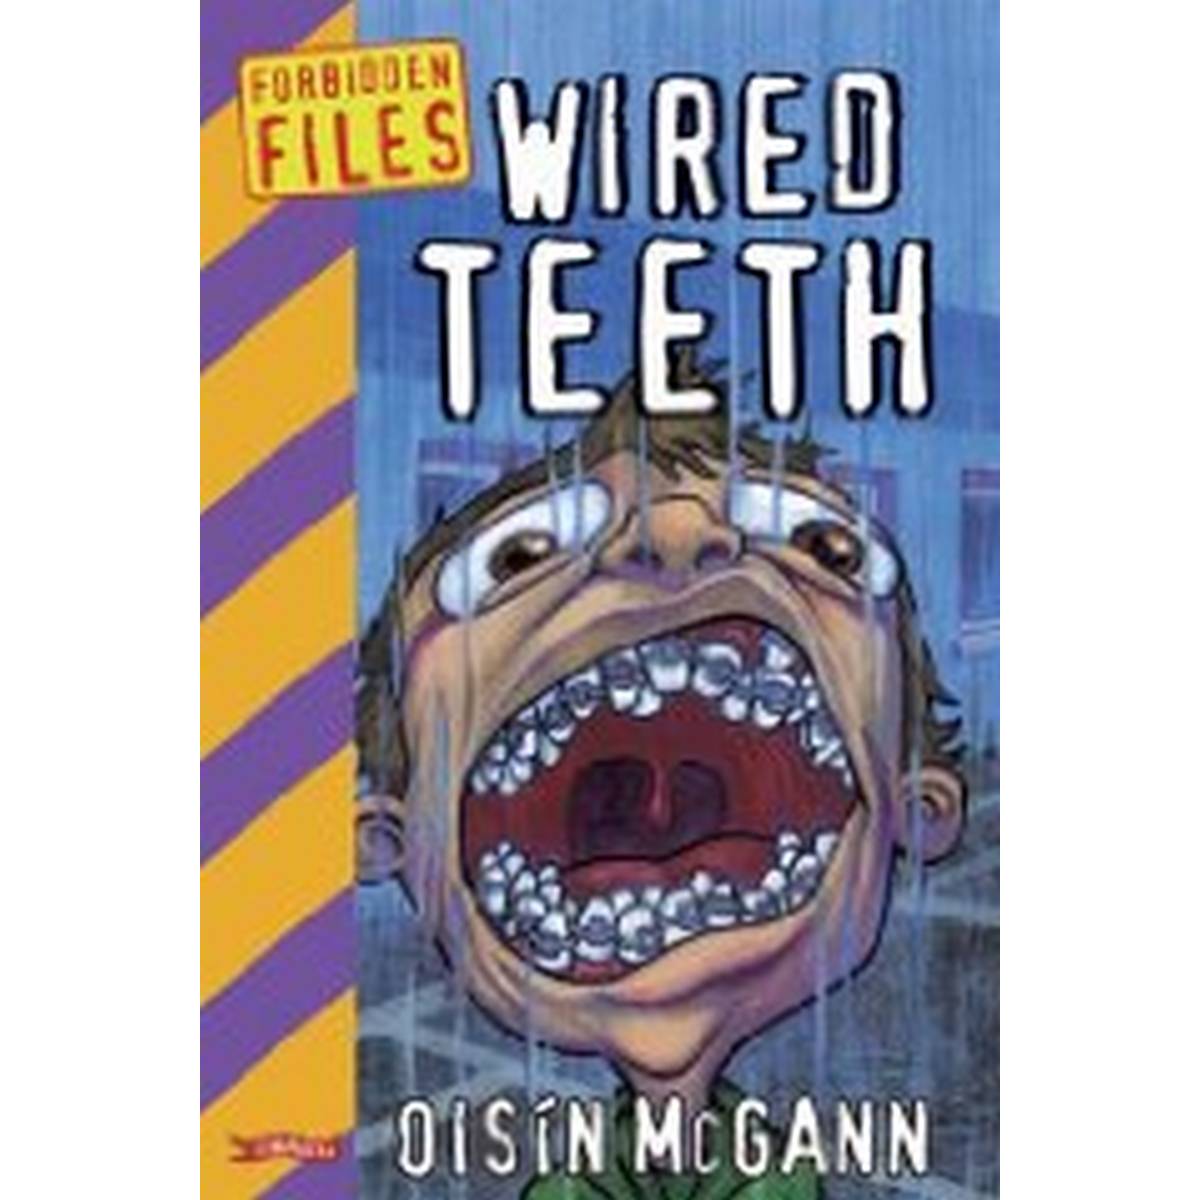 Wired Teeth (Forbidden Files)